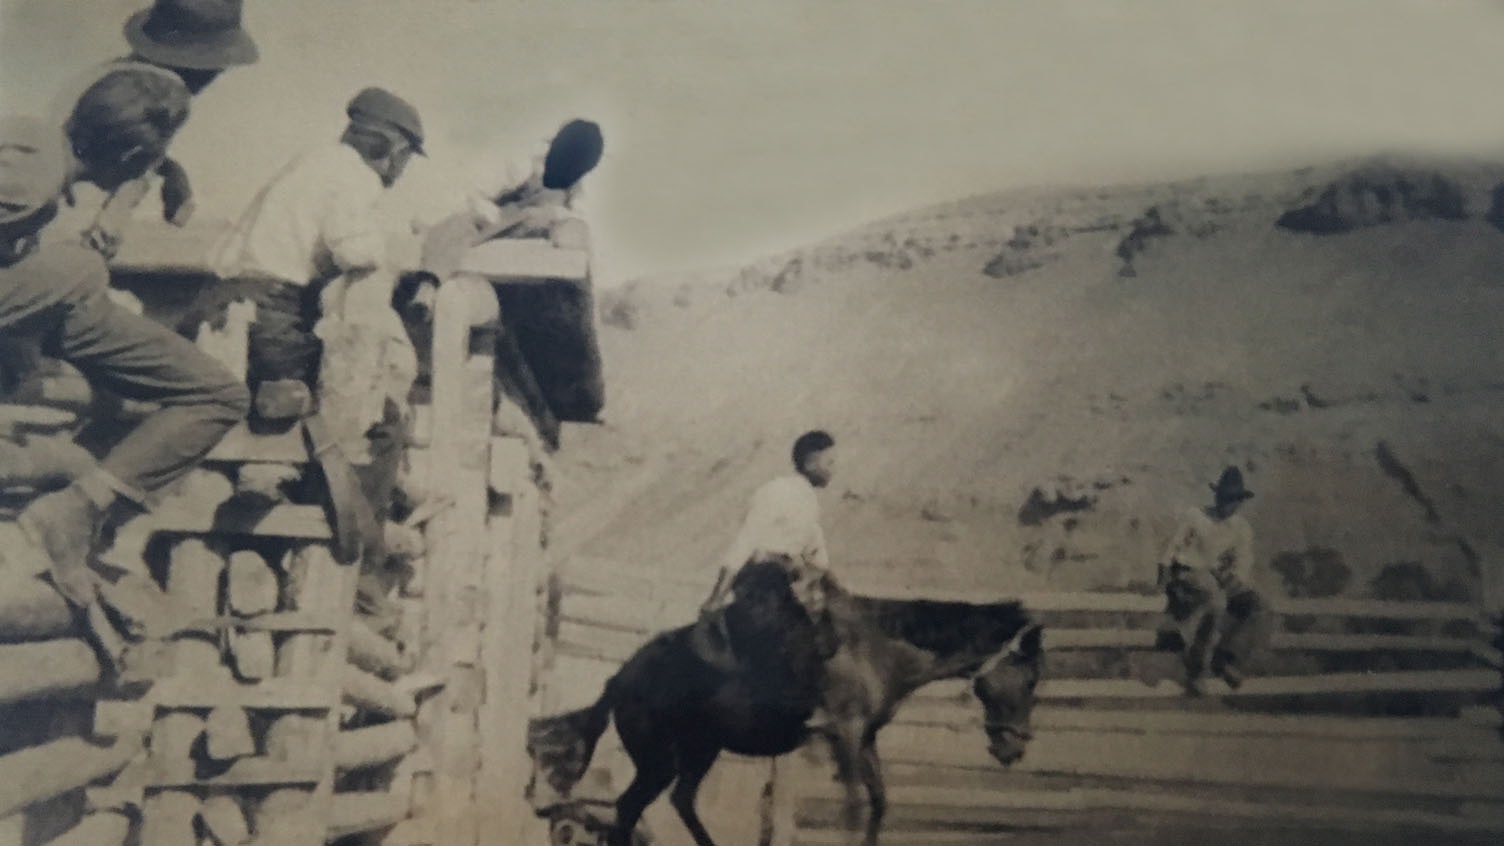 John Stepp riding horse at Stepp Ranch. Among those shown are Bill wearing a cowboy hat on the fence at left, Dutch on the shed, and Lon sitting on the fence at right.